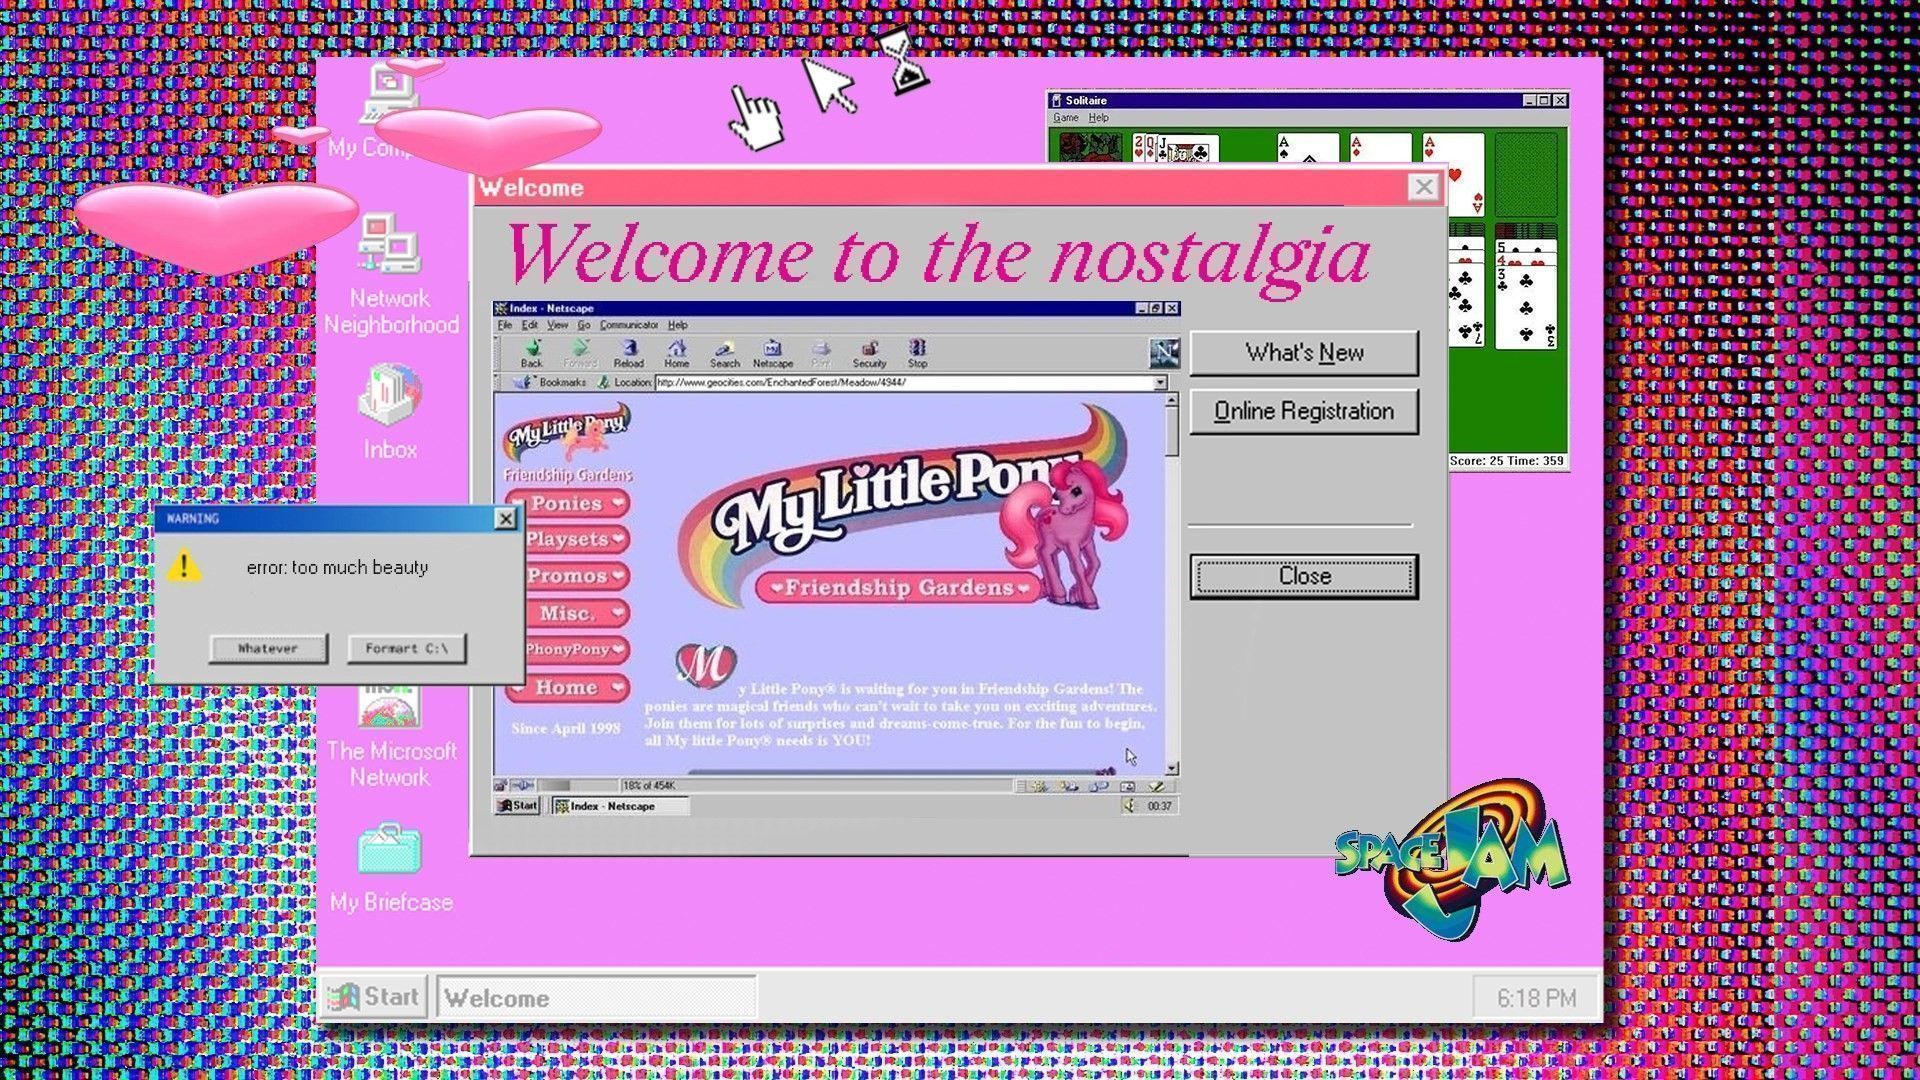 A desktop screen with a pink background and a My Little Pony logo. - 2000s, webcore, Windows 95, Internetcore